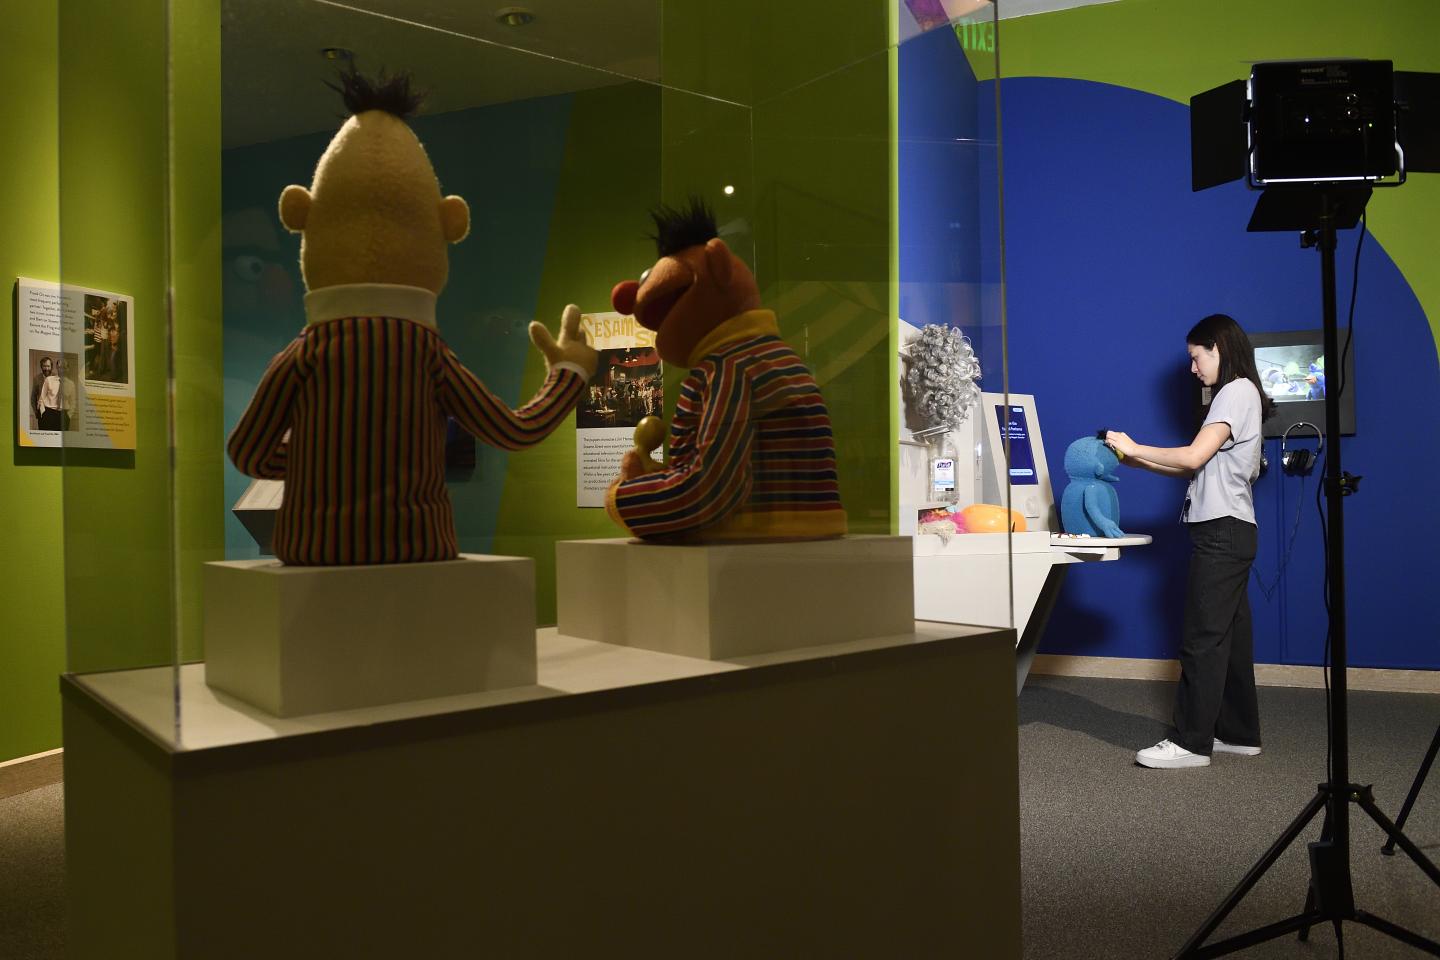 A display case with Burt and Ernie puppets is photographed from the back. Beyond the case, a young adult makes their own puppet.